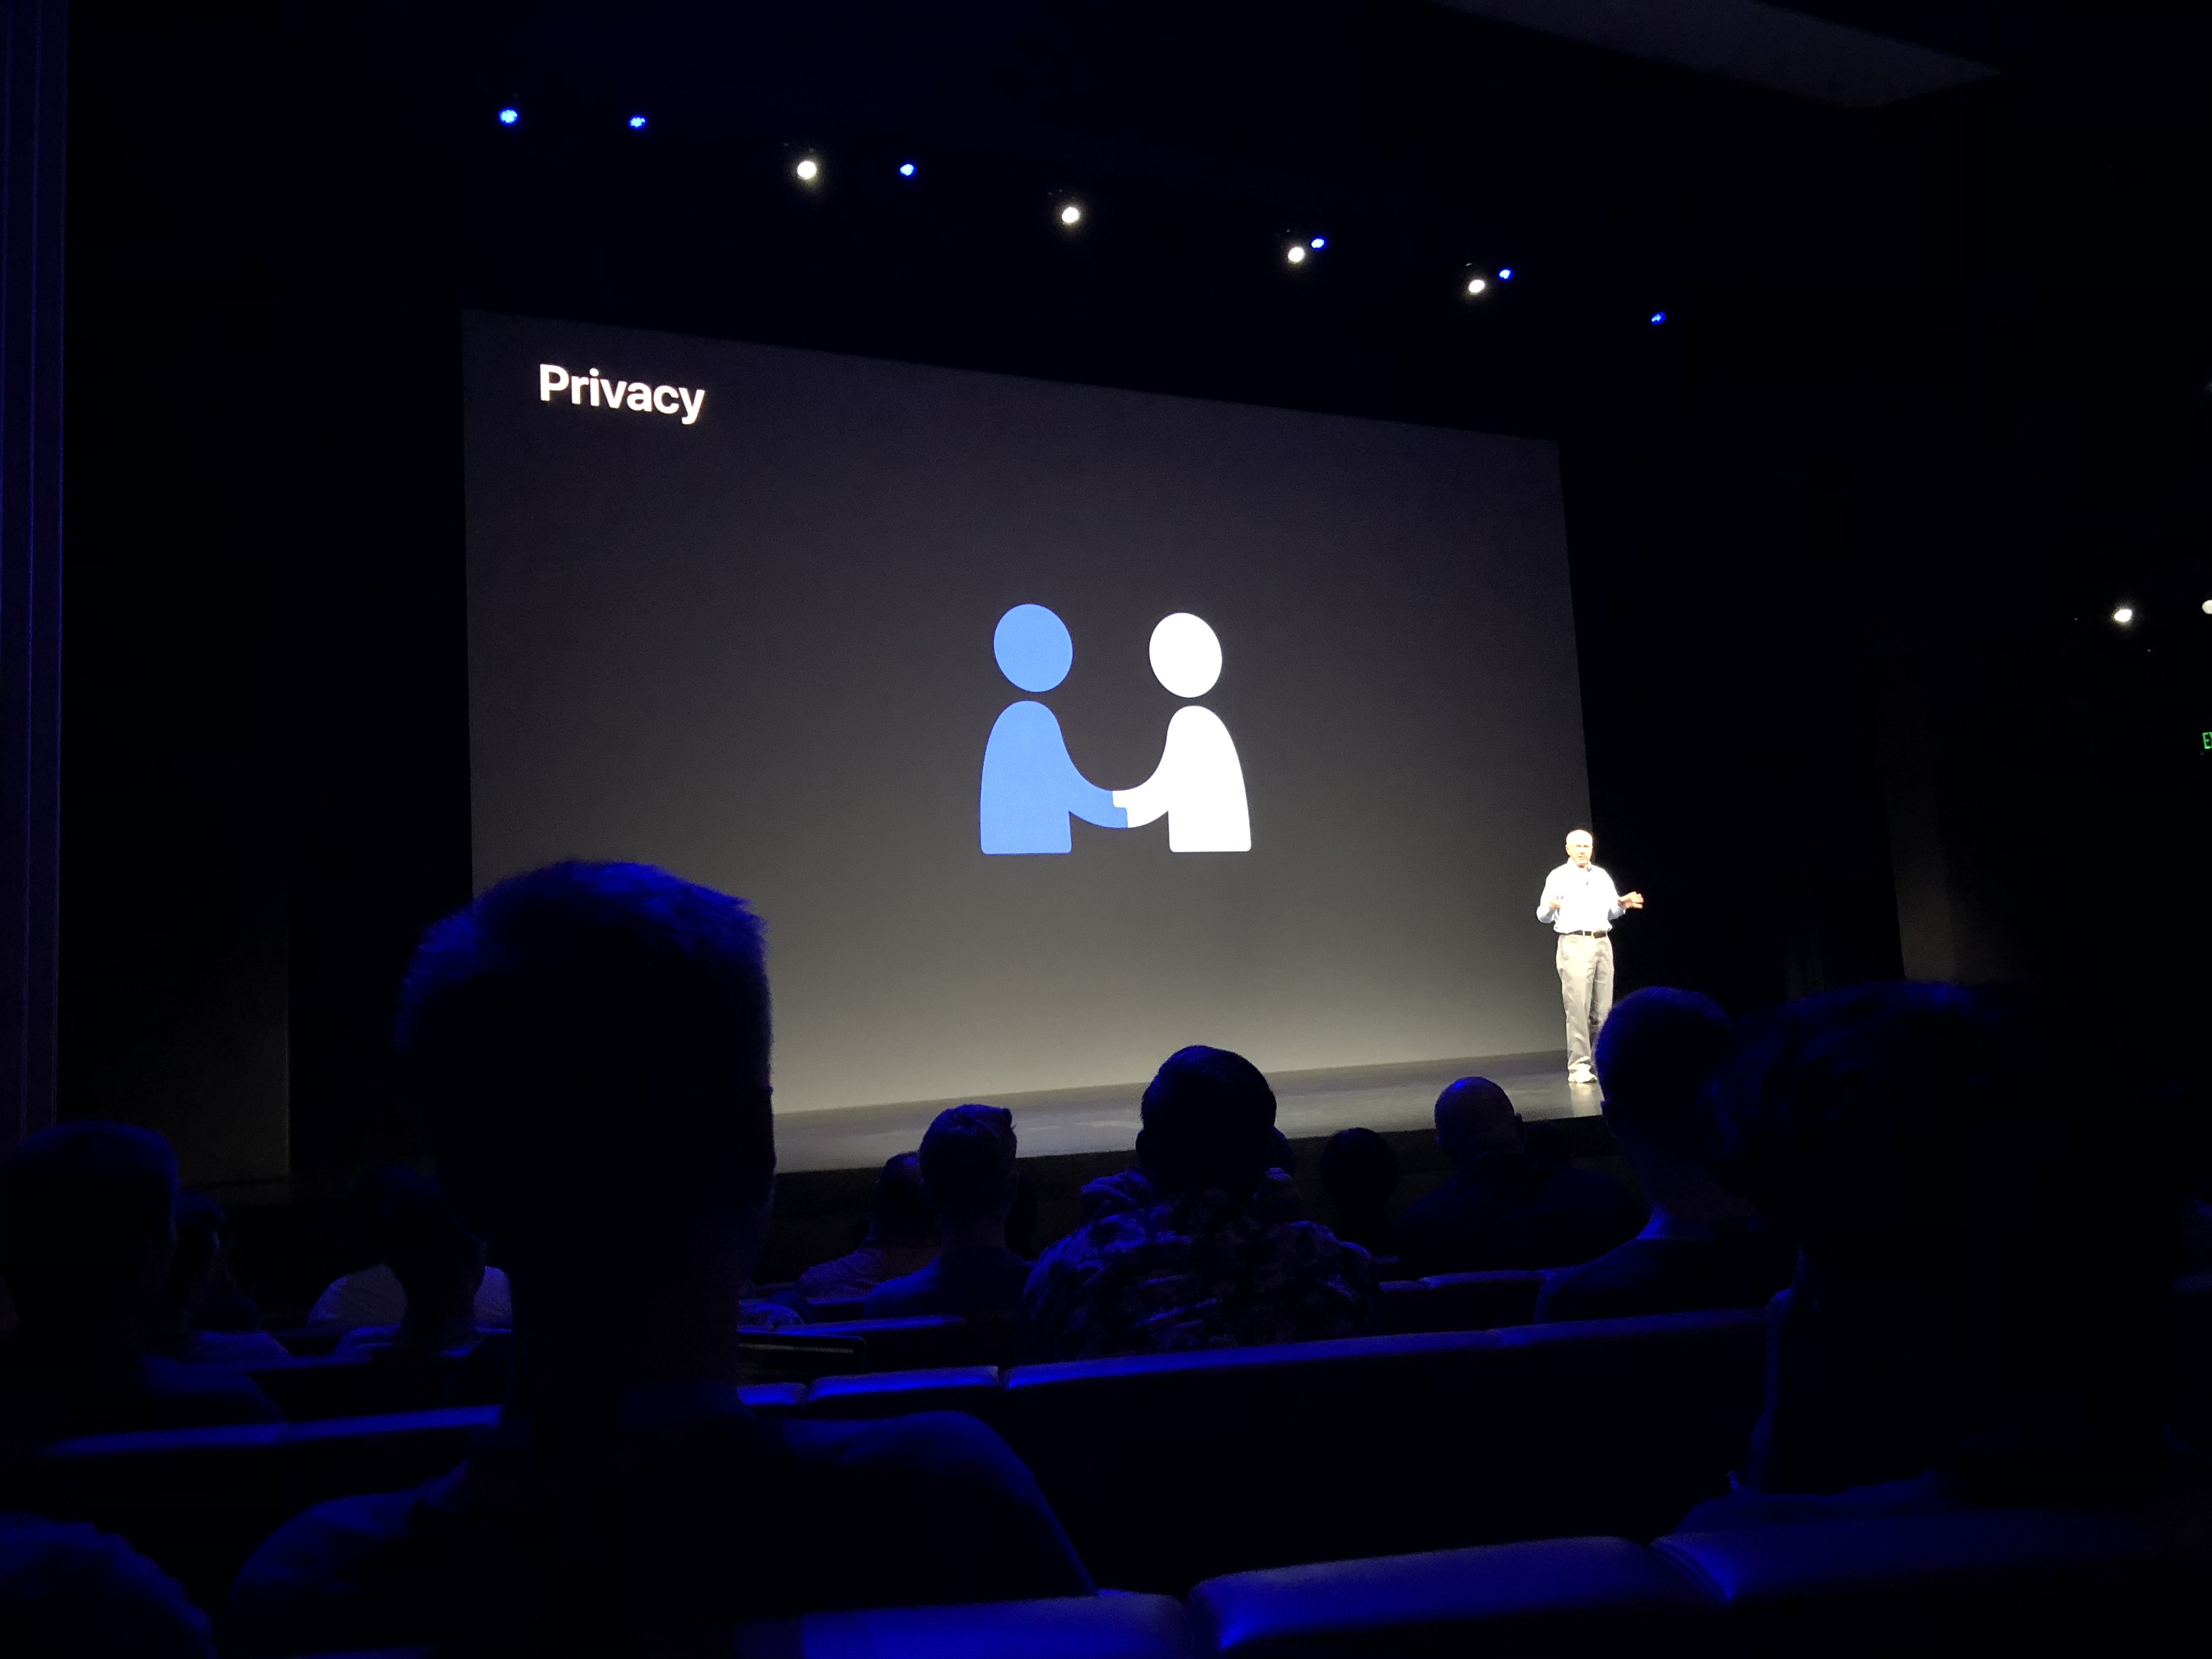 Inside the Steve Jobs Theater: That GDPR privacy symbol